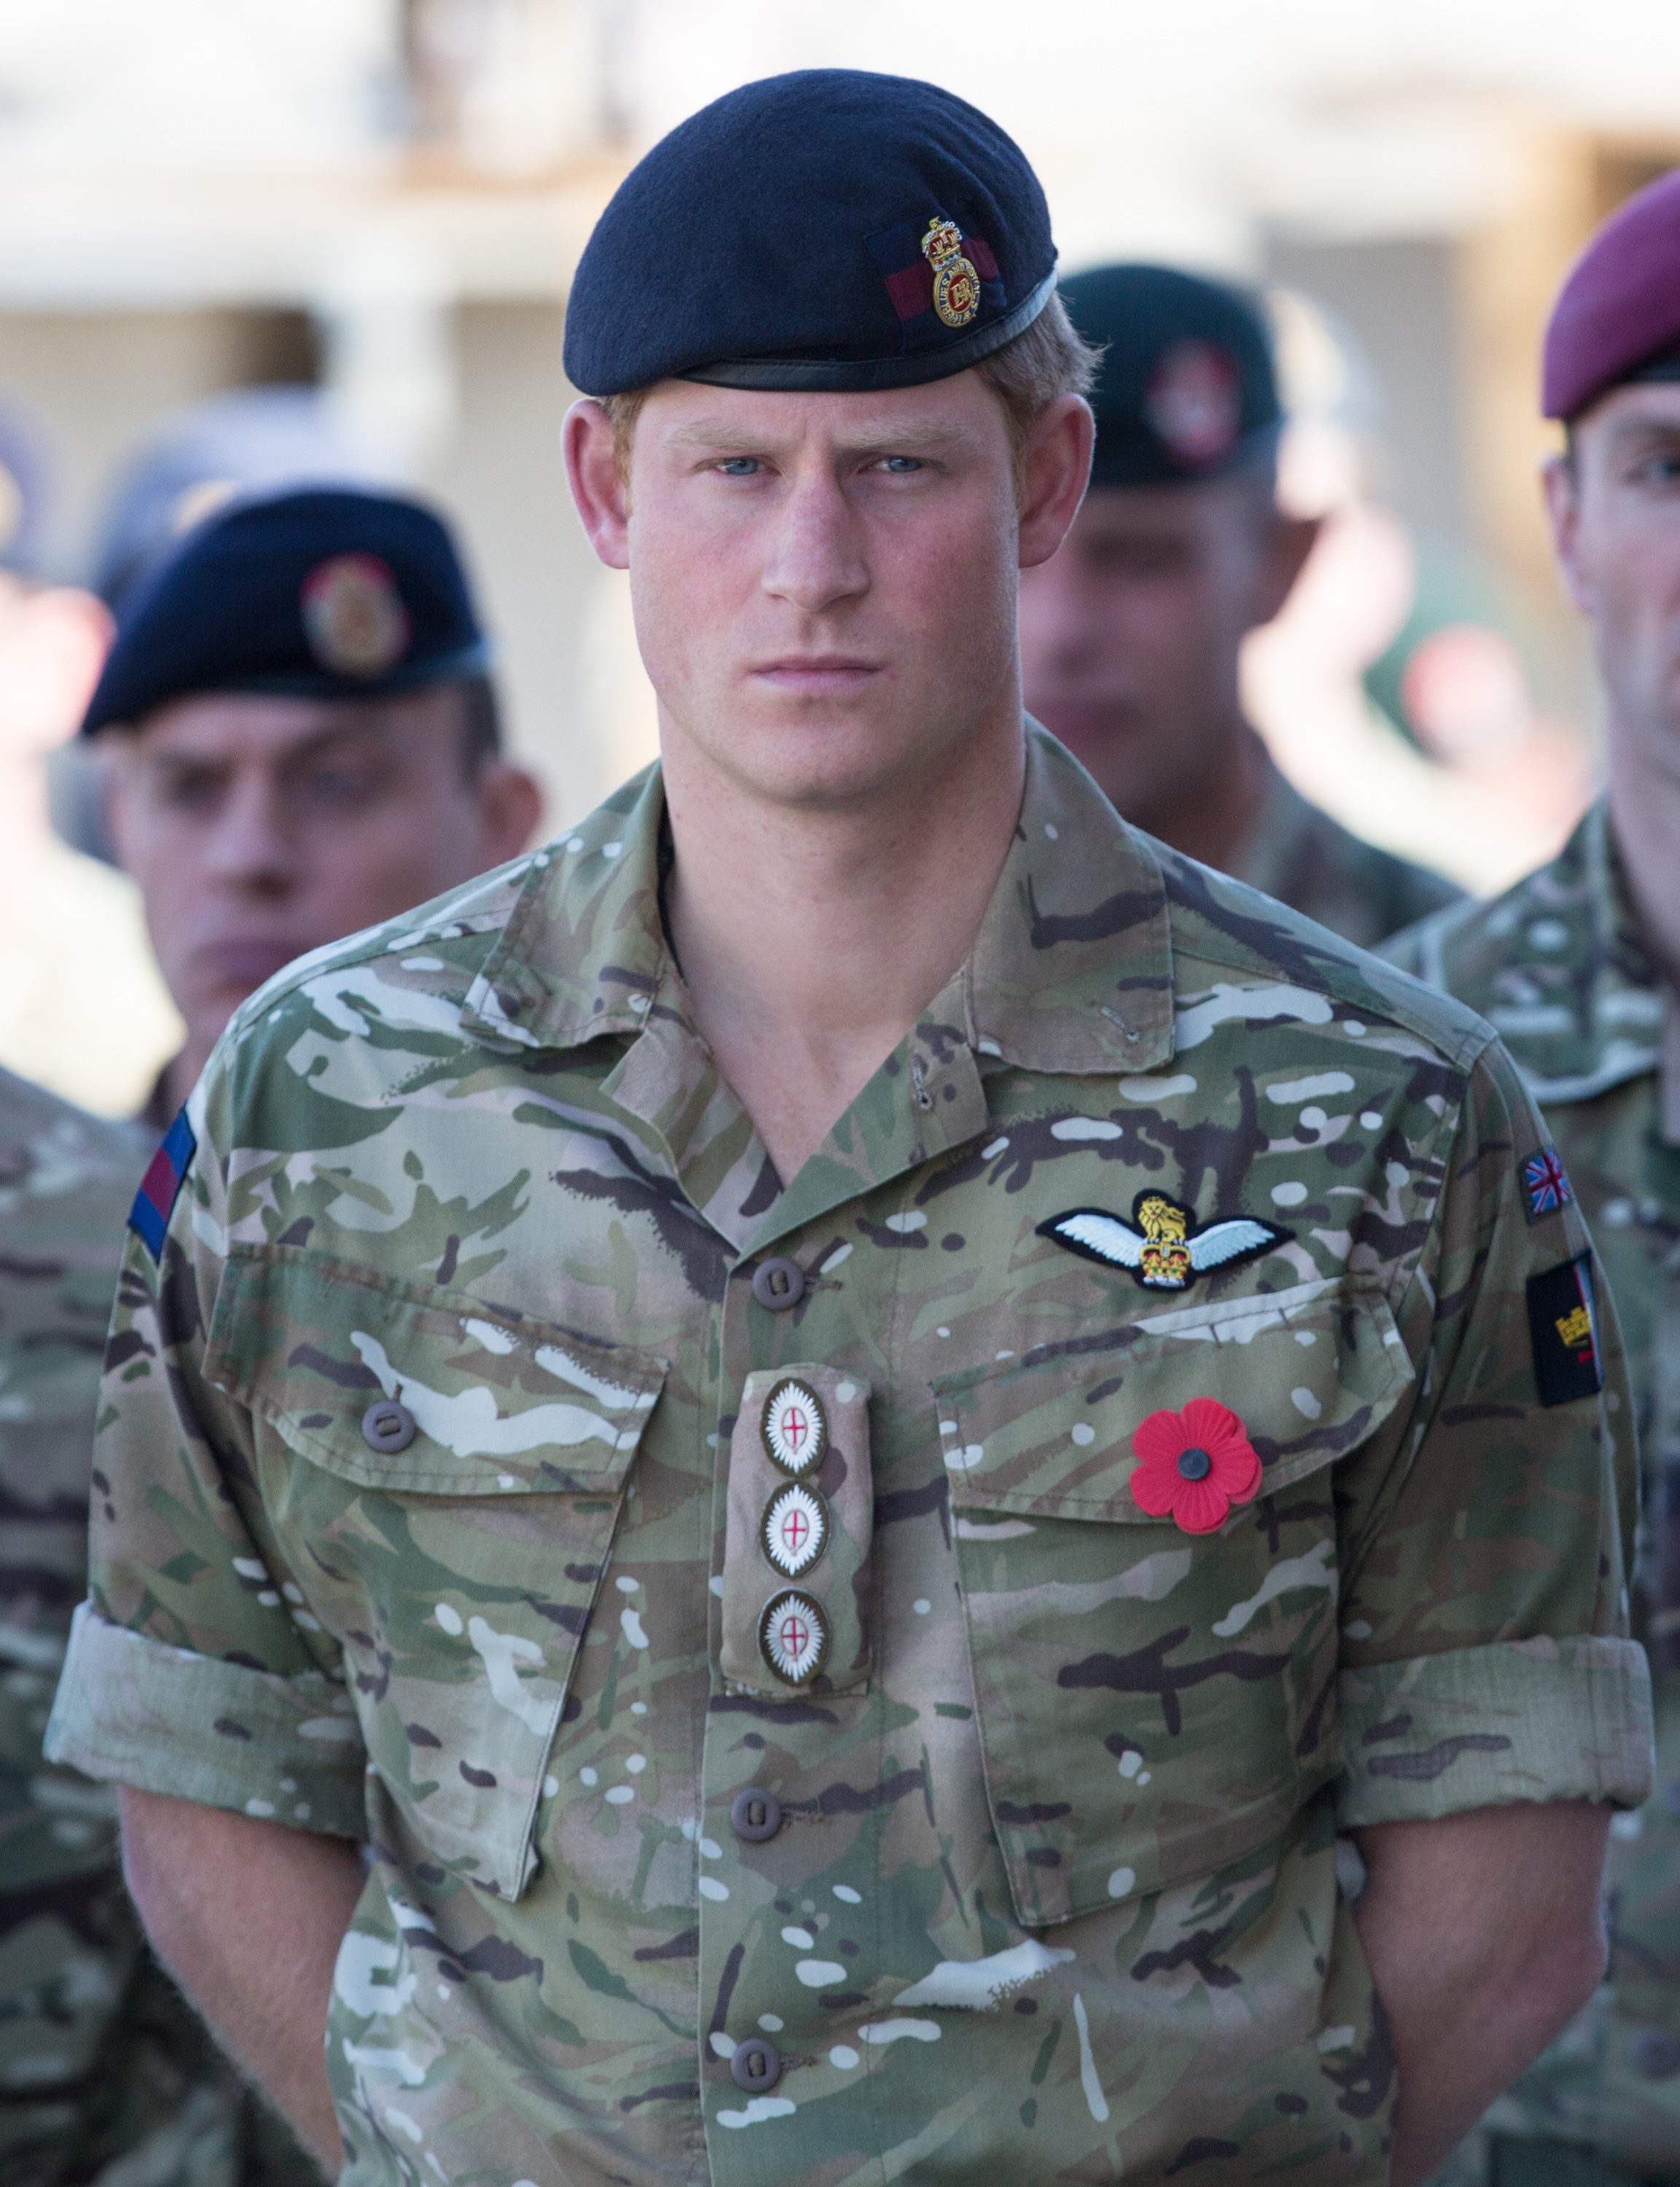 Prince Harry at a Remembrance Sunday service at Kandahar Airfield in Afghanistan on Nov. 9, 2014. (Matt Cardy—Getty Images)